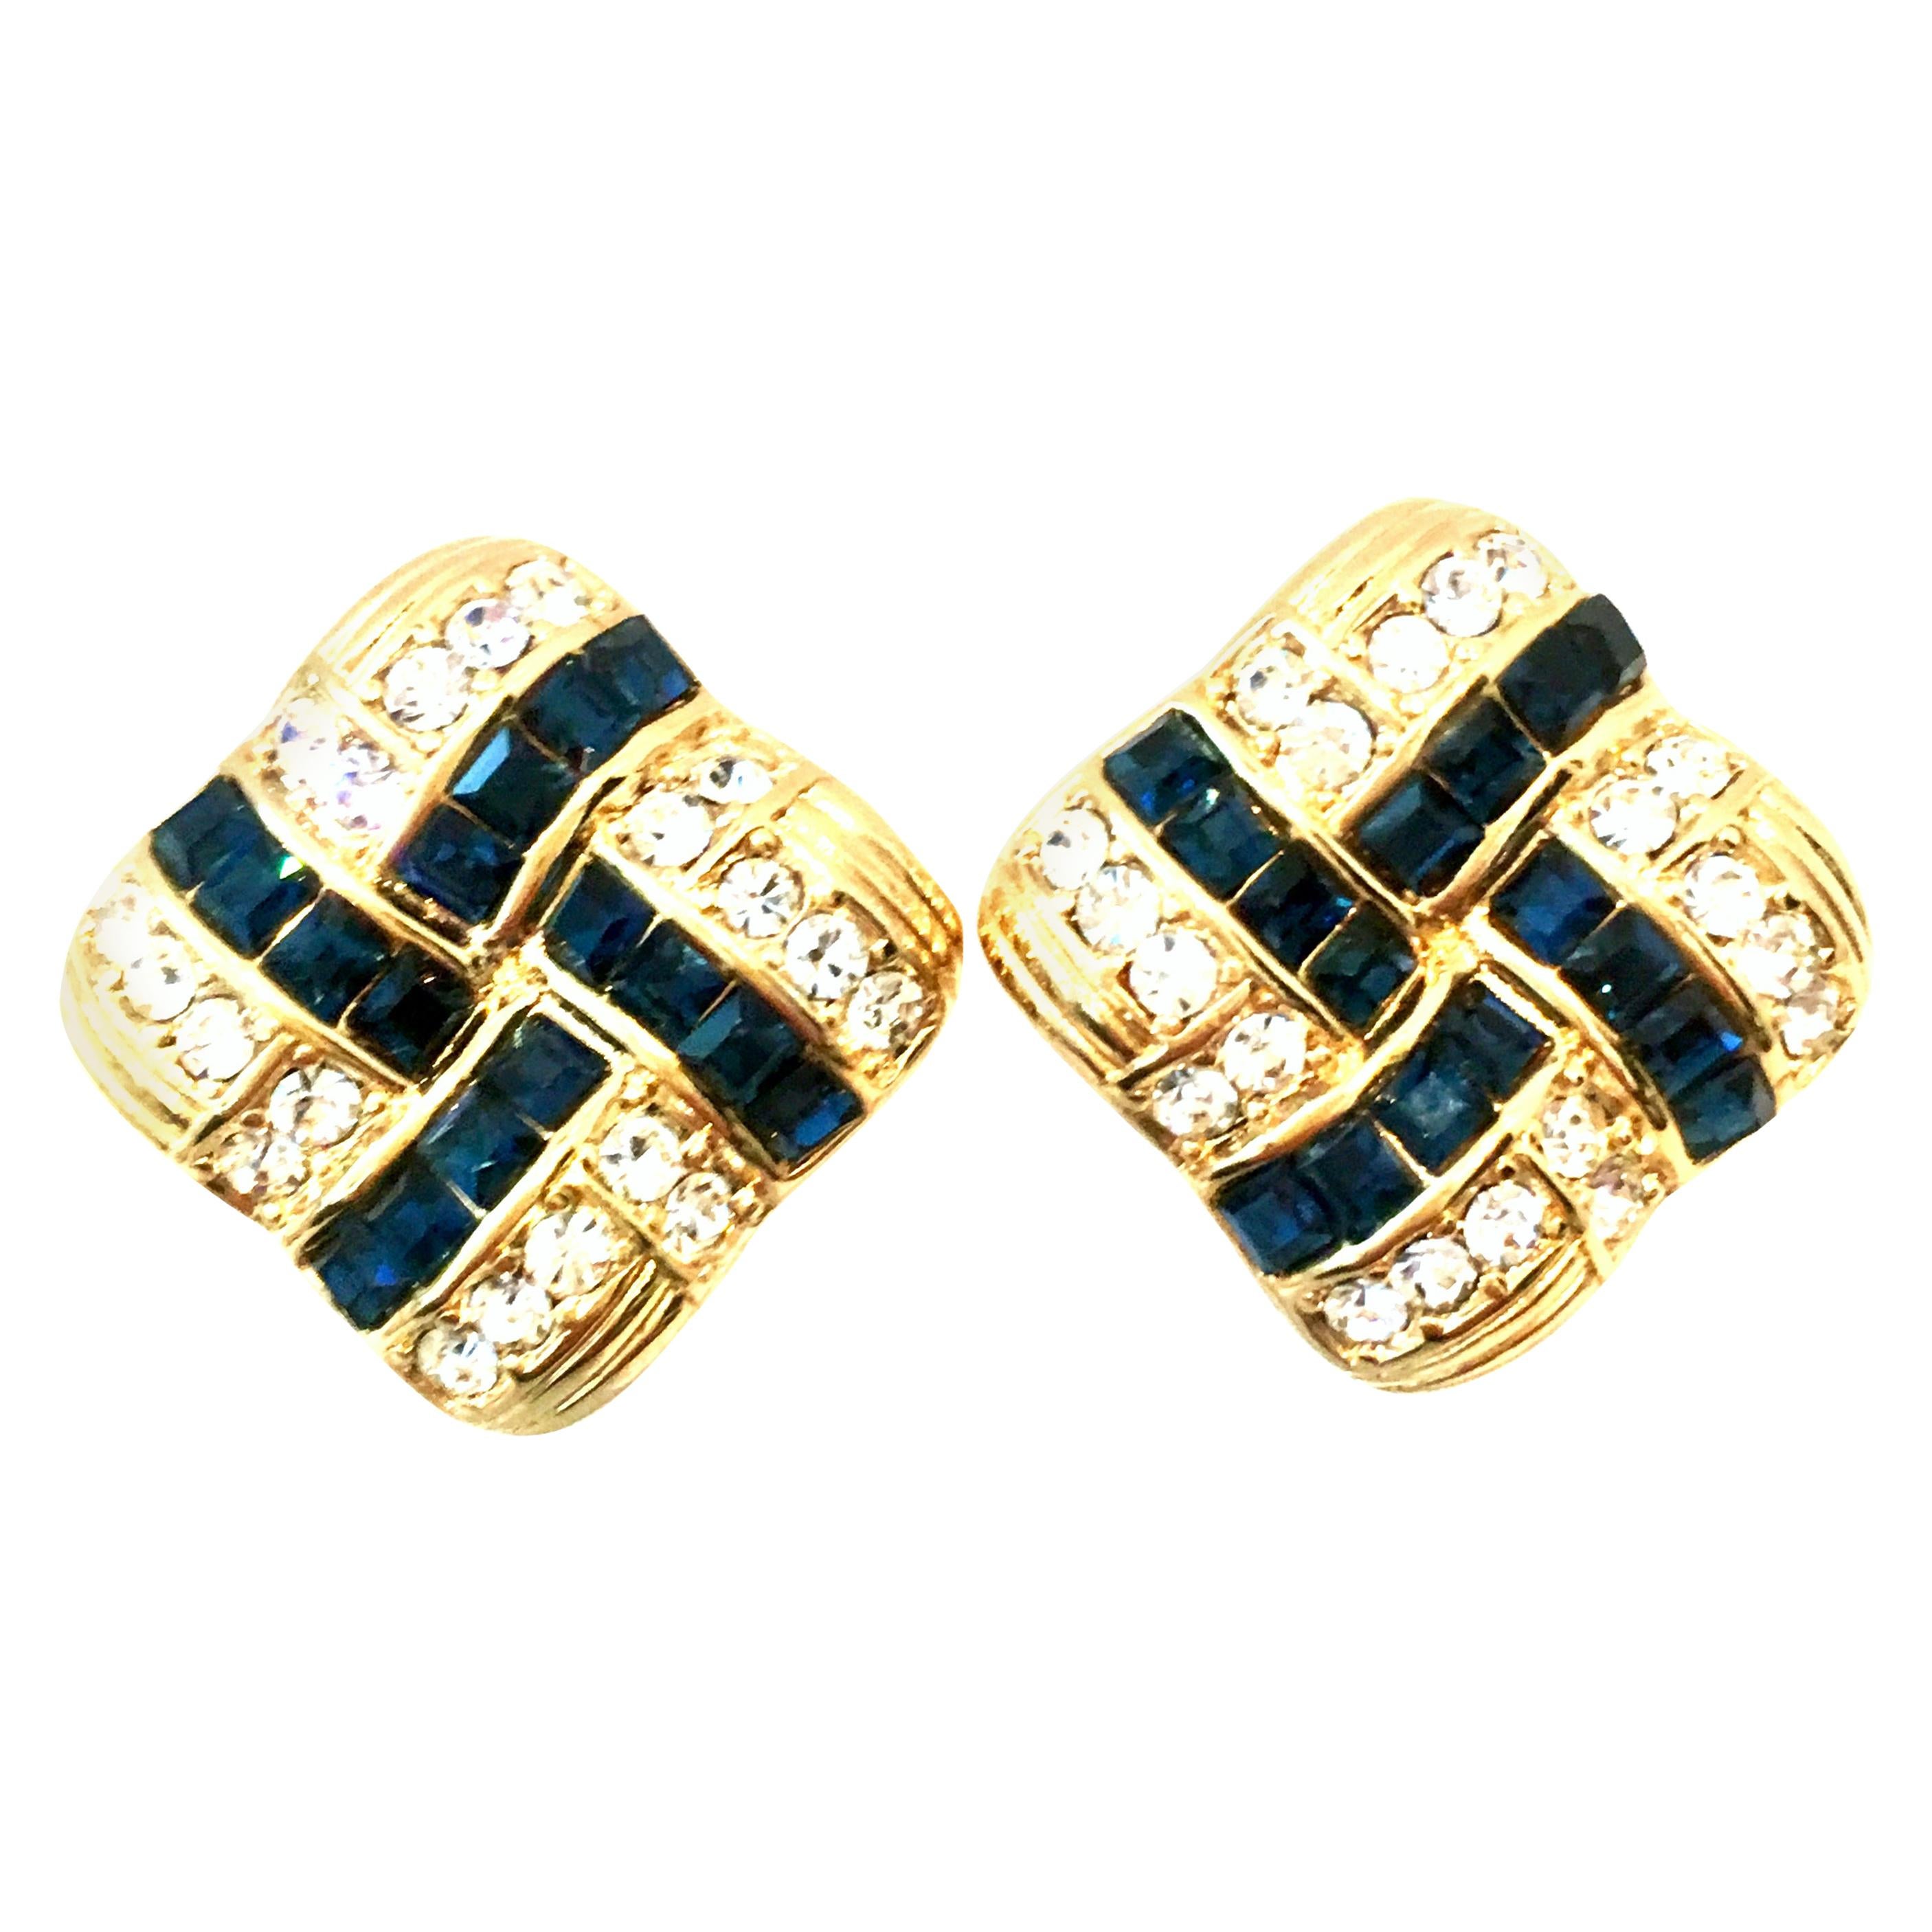 20th Century Pair Of Gold Plate & Swarovski Crystal Earrings By, Nolan Miller. These finely crafted Art Deco style dimensional and pillowed clip on earrings feature gold plate set brilliant cut and faceted Swarovski crystal sapphire blue and